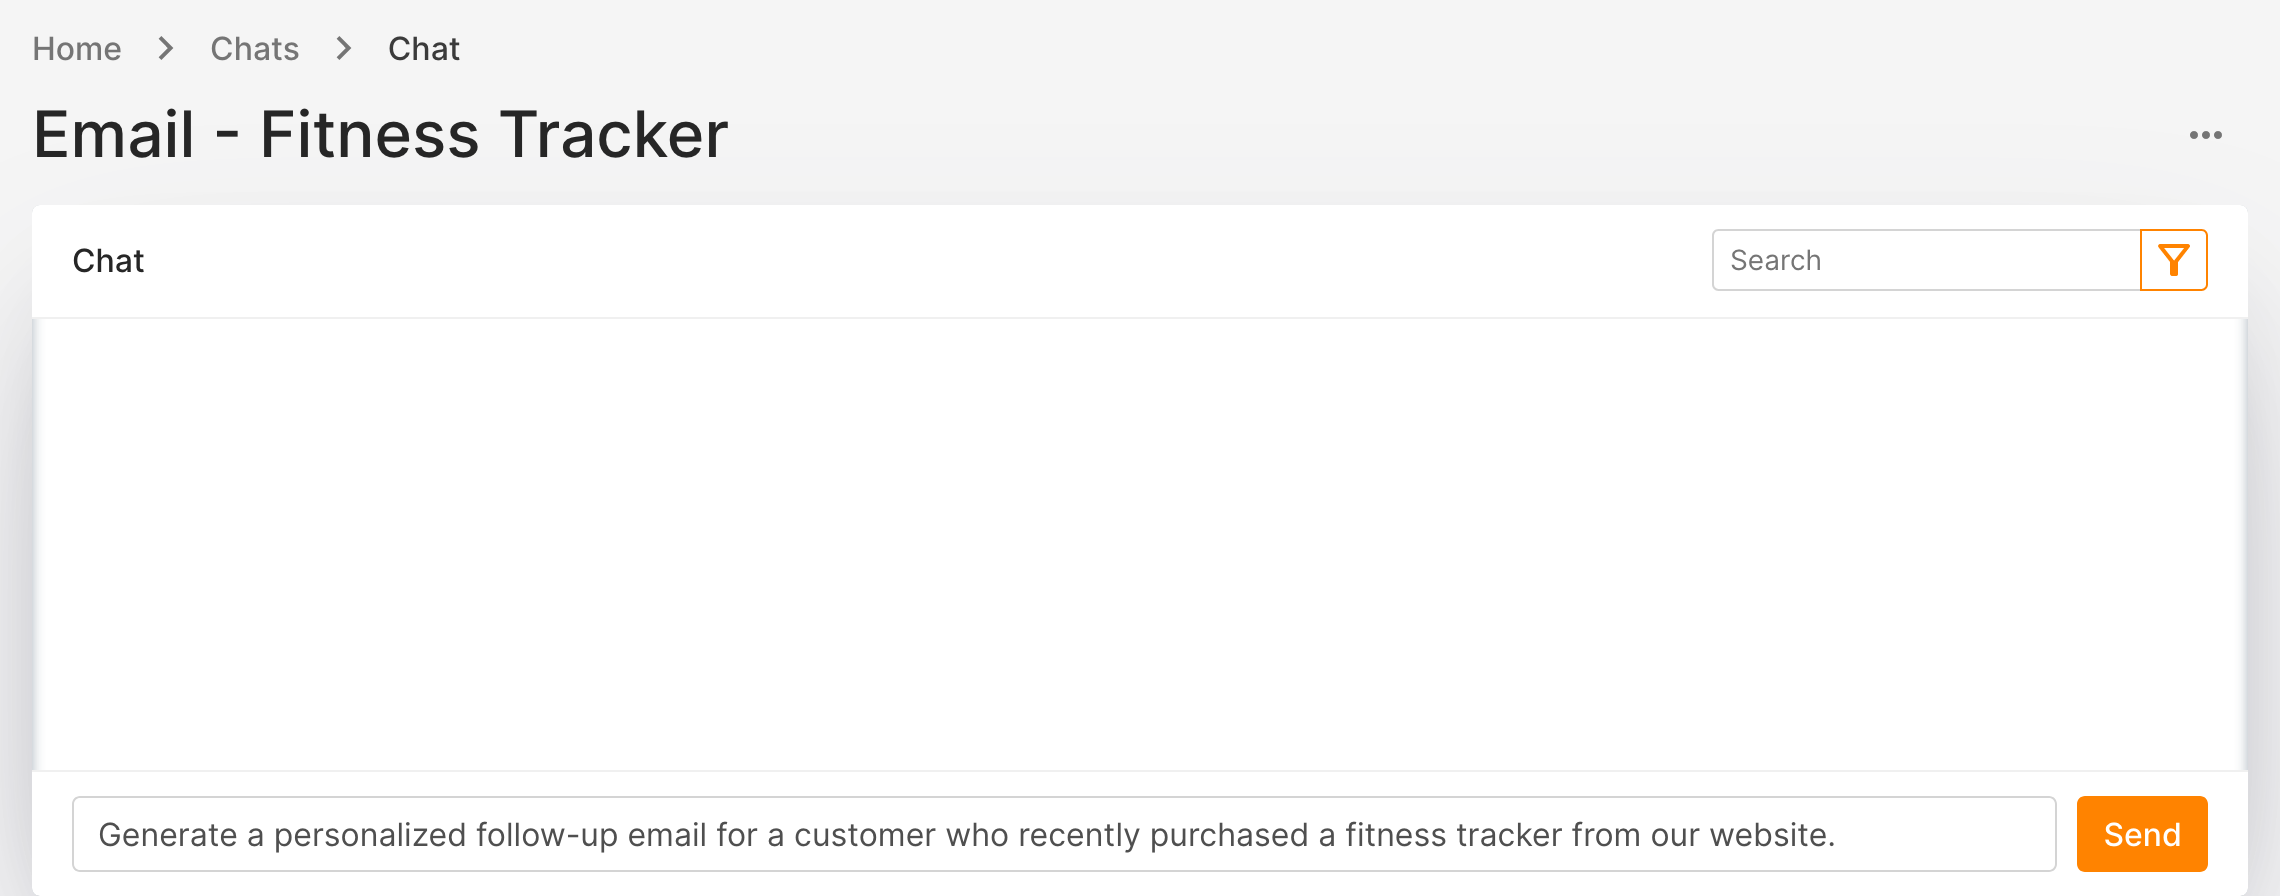 New Chat - Personalized Email - Fitness Tracker 2